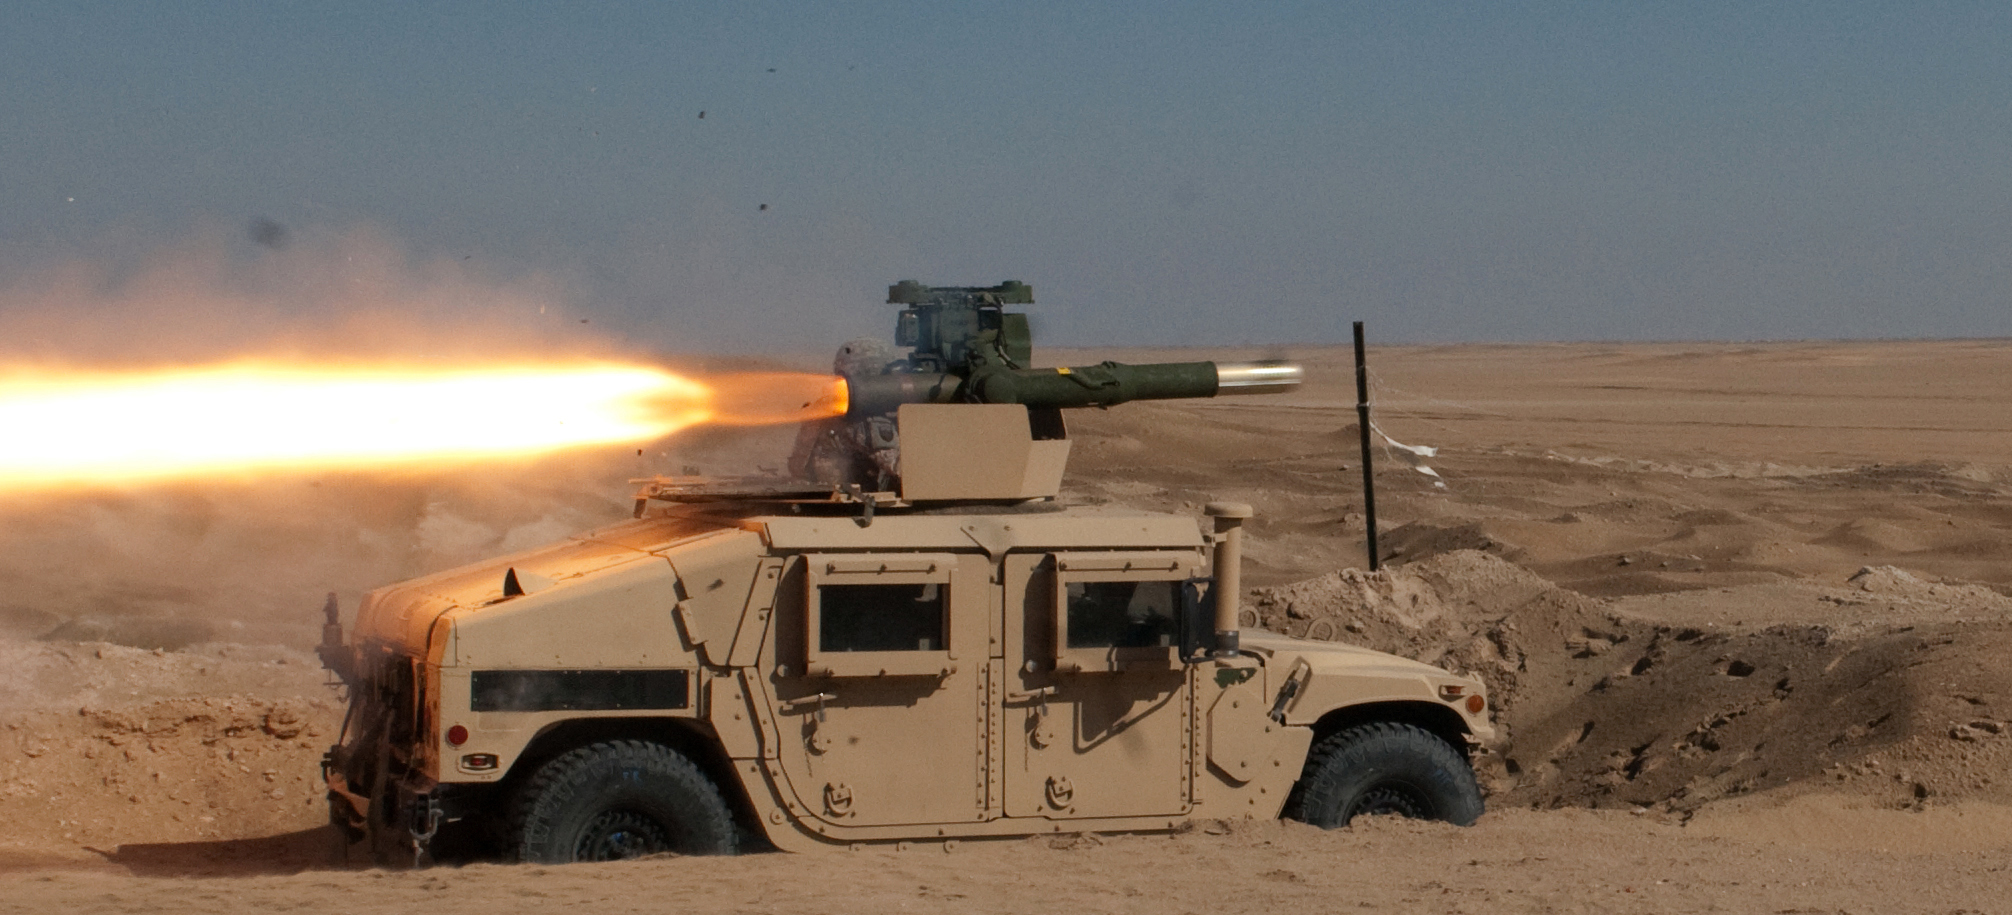 At home on the range: SC Army National Guard Troops blast targets with TOW missiles [Image 8 of 11]